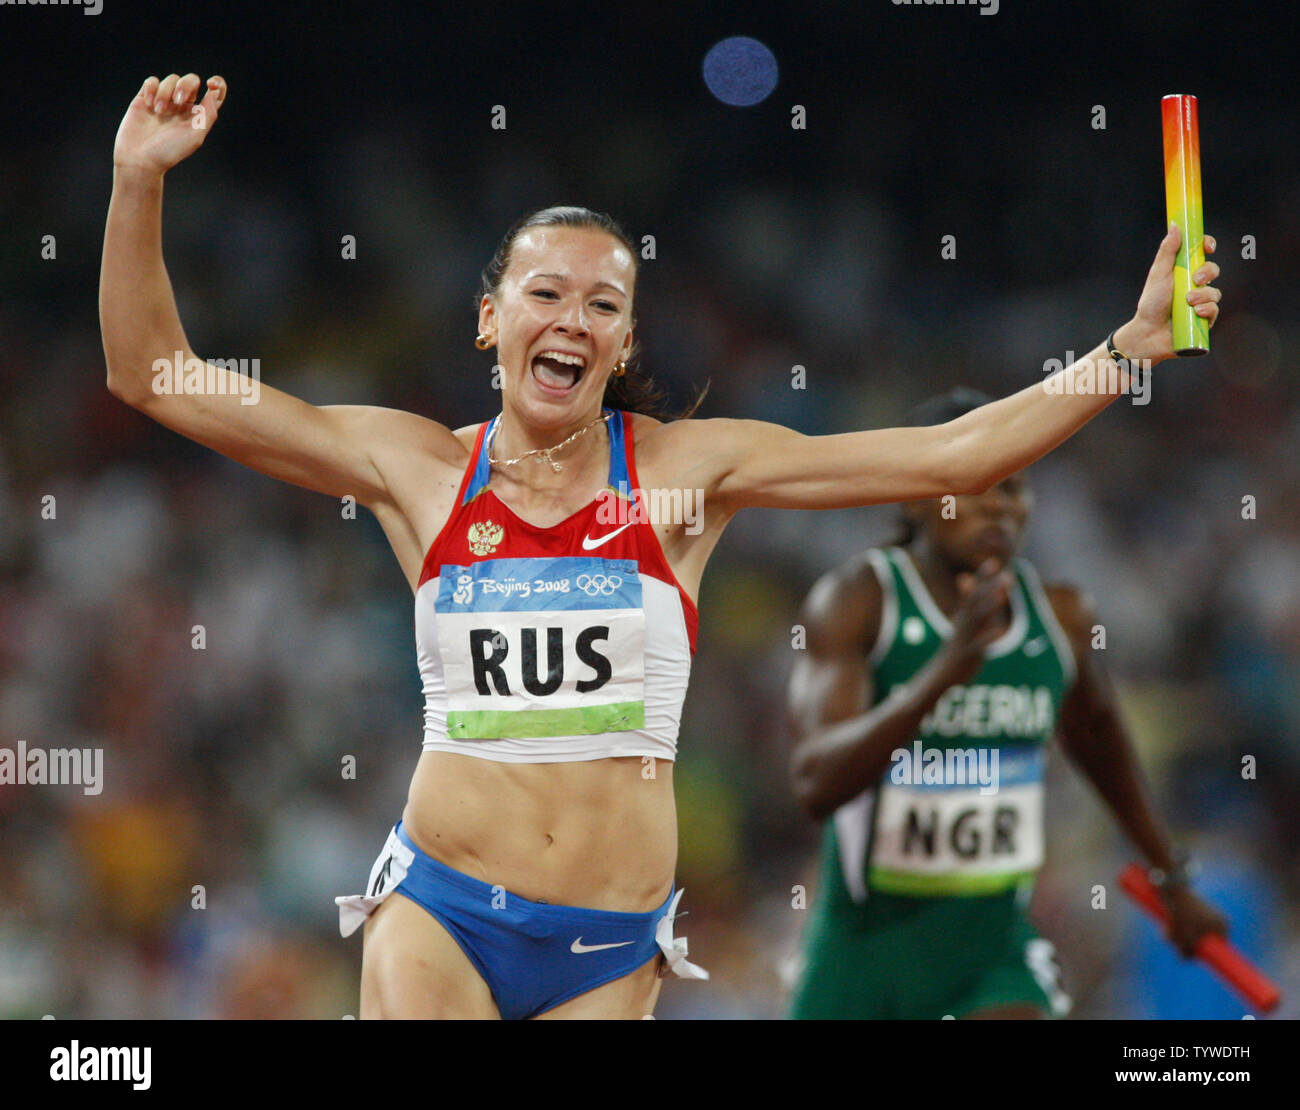 Yuliya Chermoshanskaya of Russia celebrates winning the women's 4x100m relay at the 2008 Summer Olympics in the National Stadium in Beijing on August 22, 2008. Russia won gold with a time of 42.31.    (UPI Photo/Terry Schmitt) Stock Photo